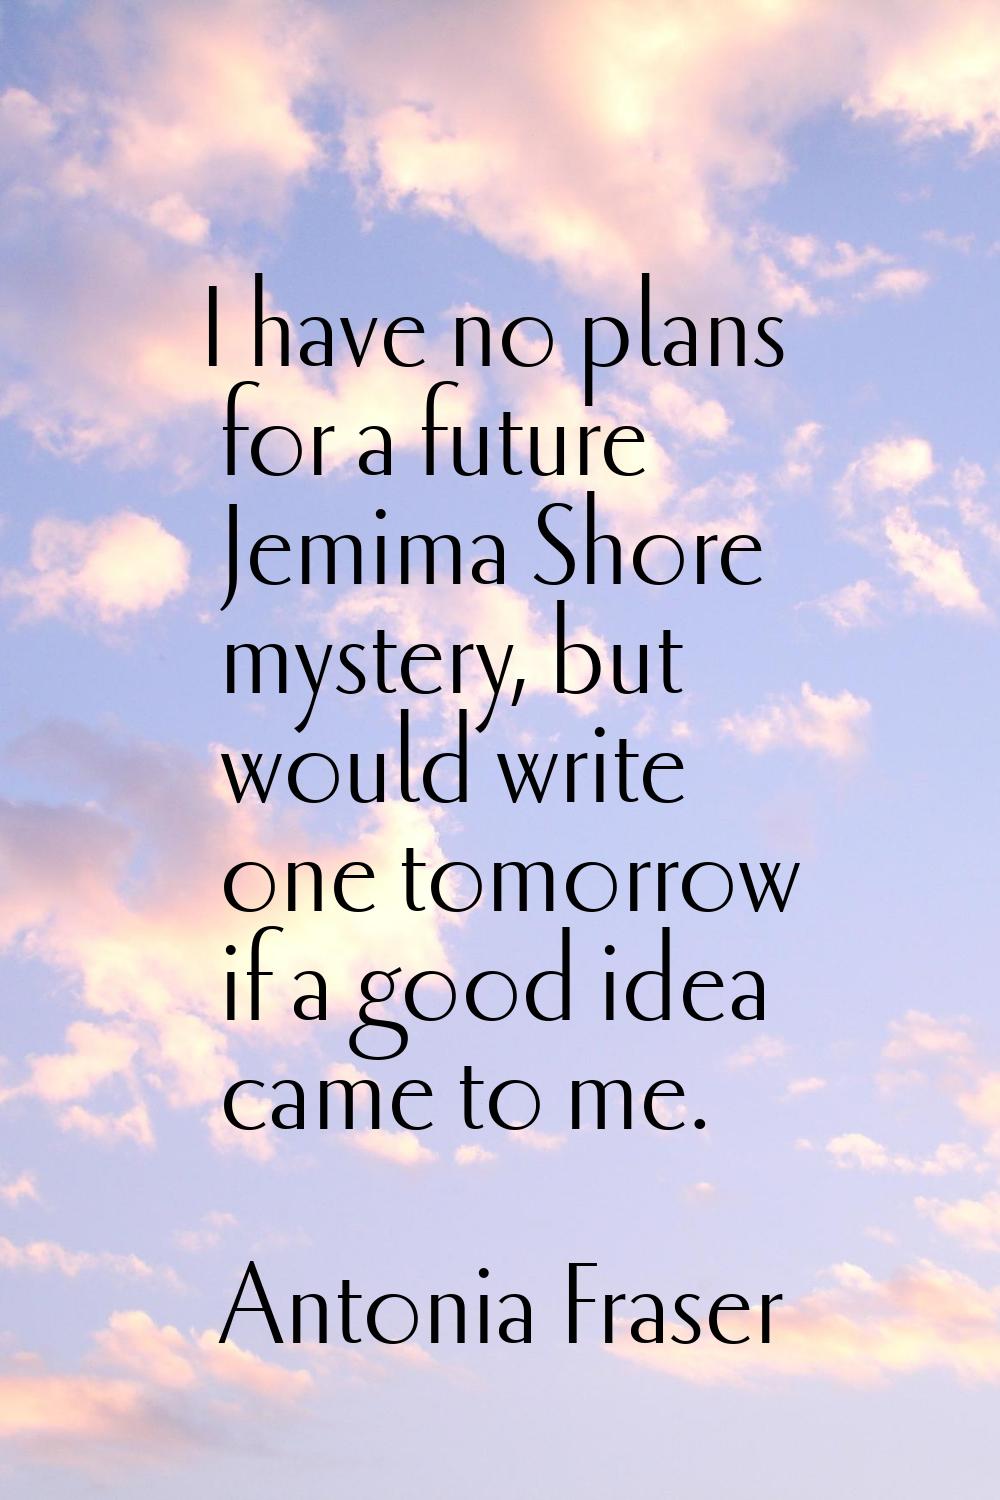 I have no plans for a future Jemima Shore mystery, but would write one tomorrow if a good idea came